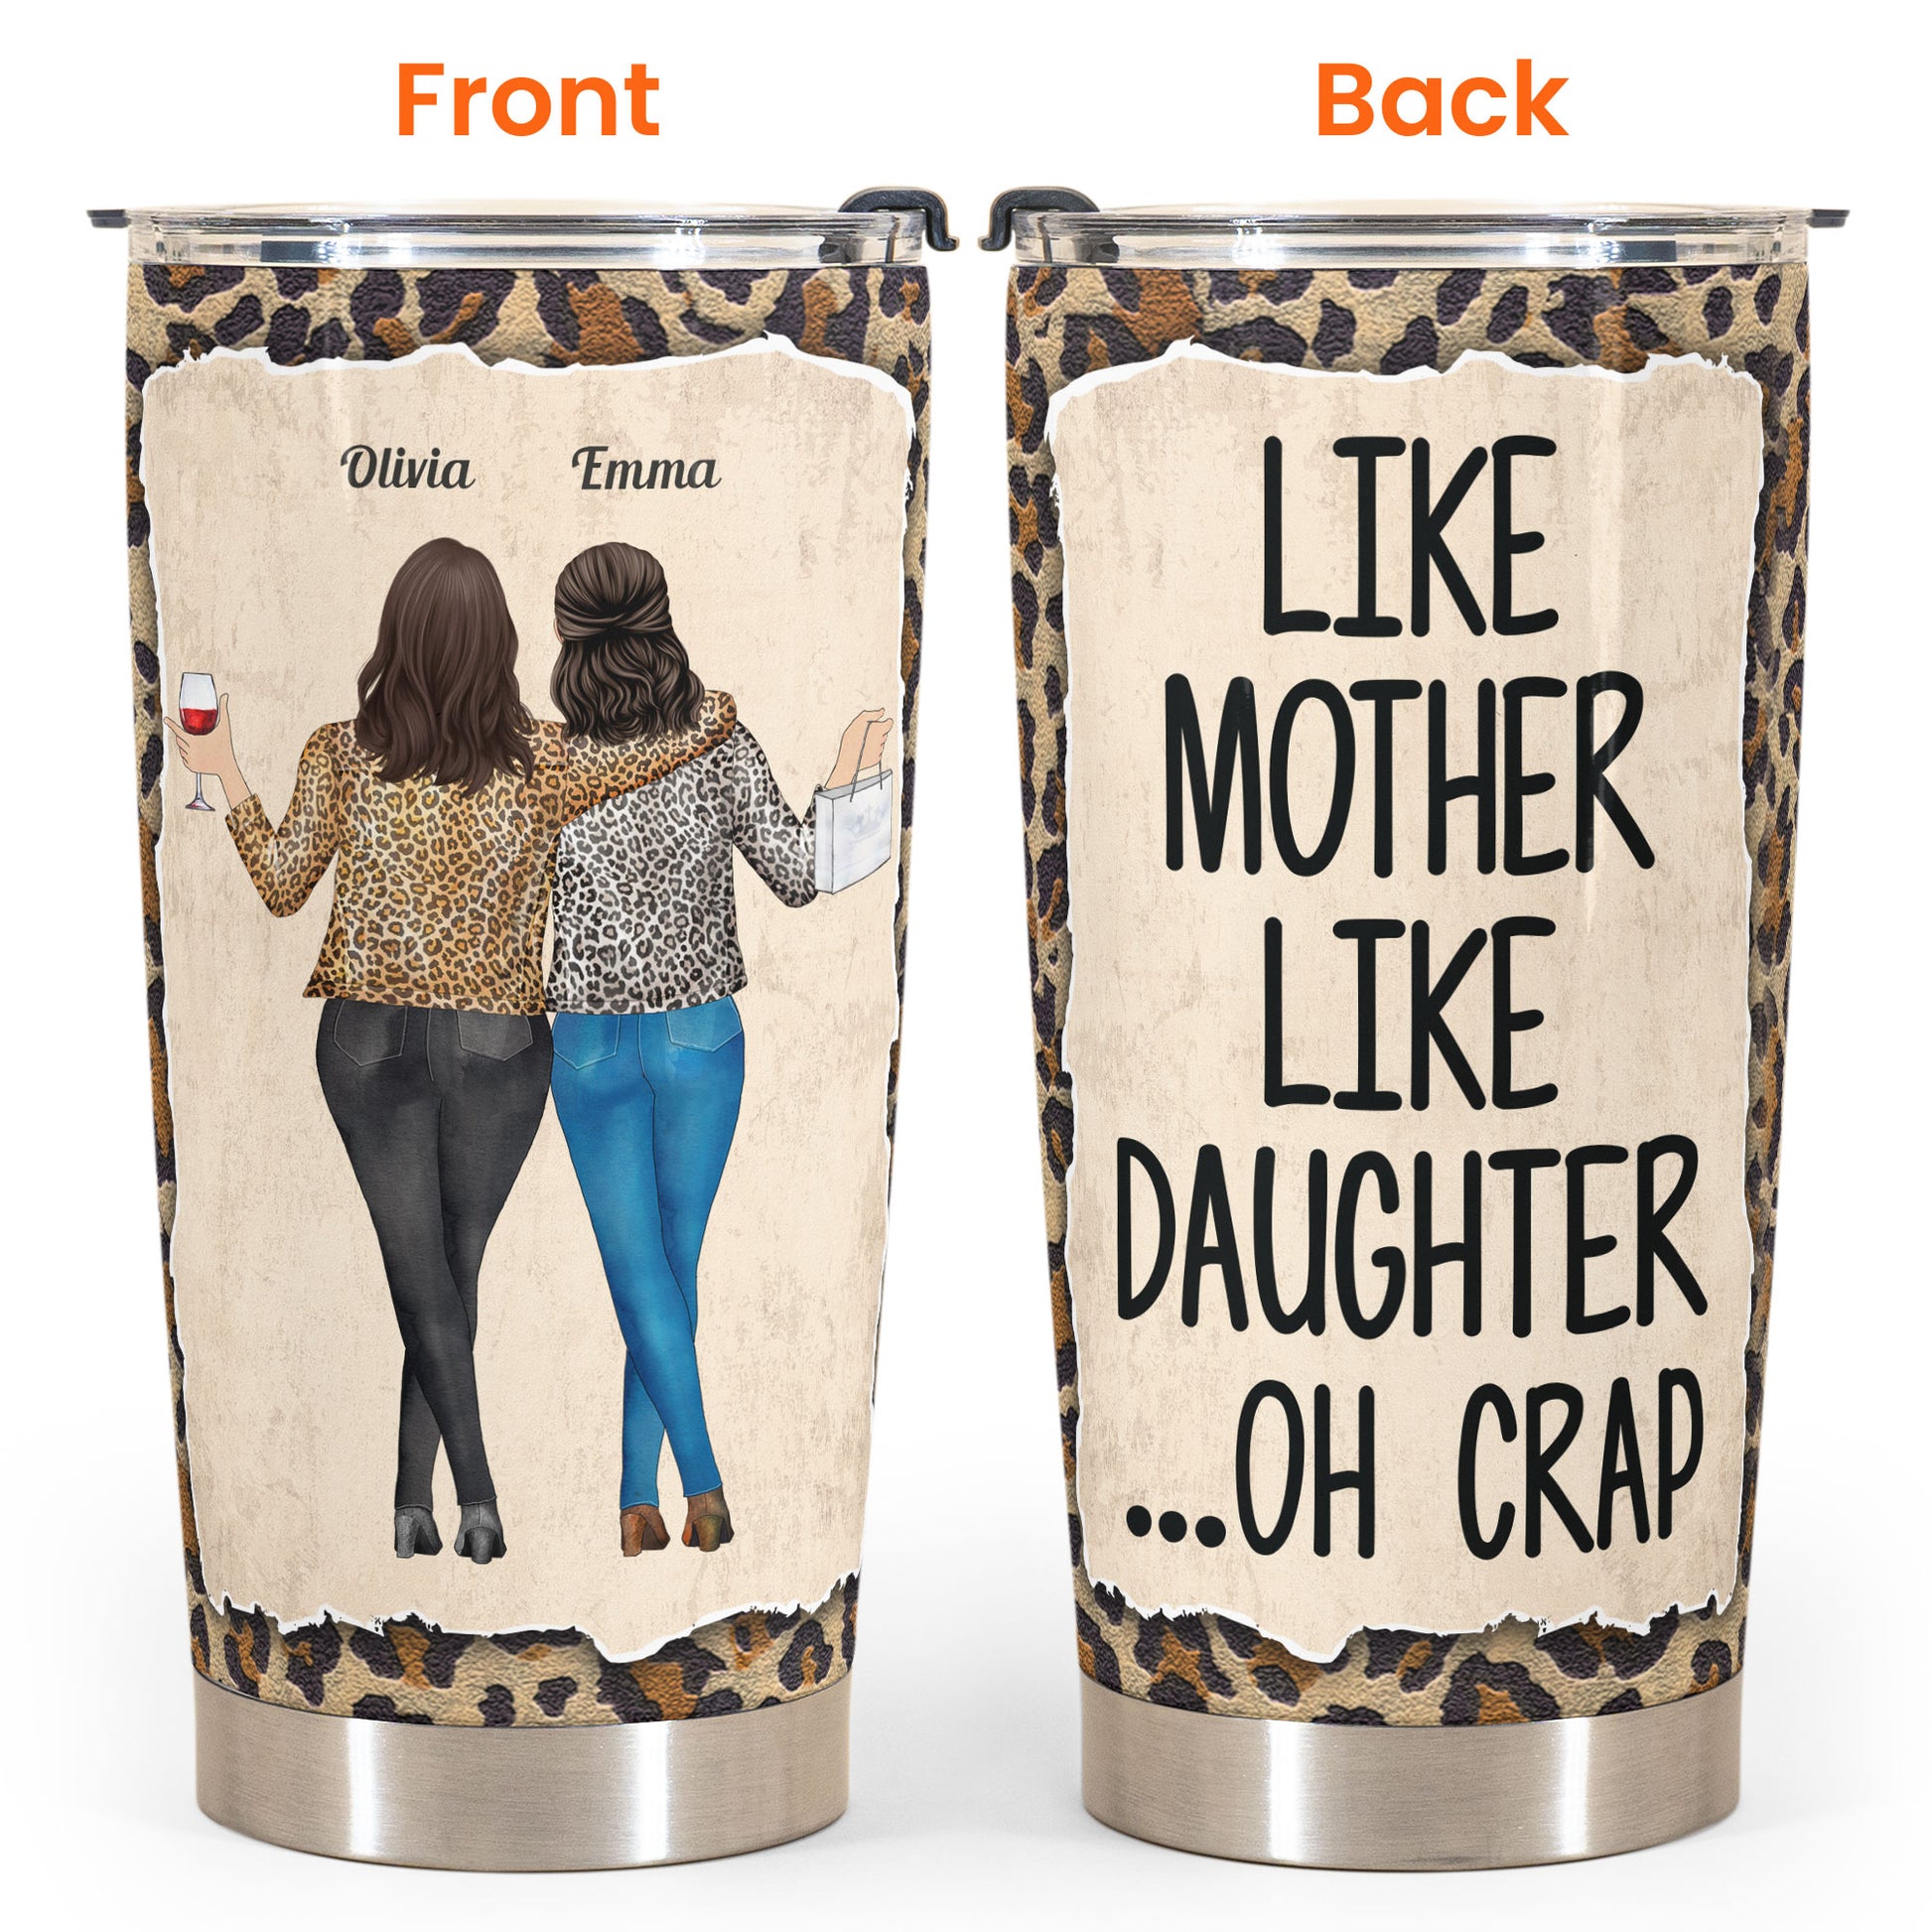 Like Mother Like Daughter - Personalized Tumbler Cup - Birthday, Mother’s Day Gift For Mother, Mom, Mama From Daughter